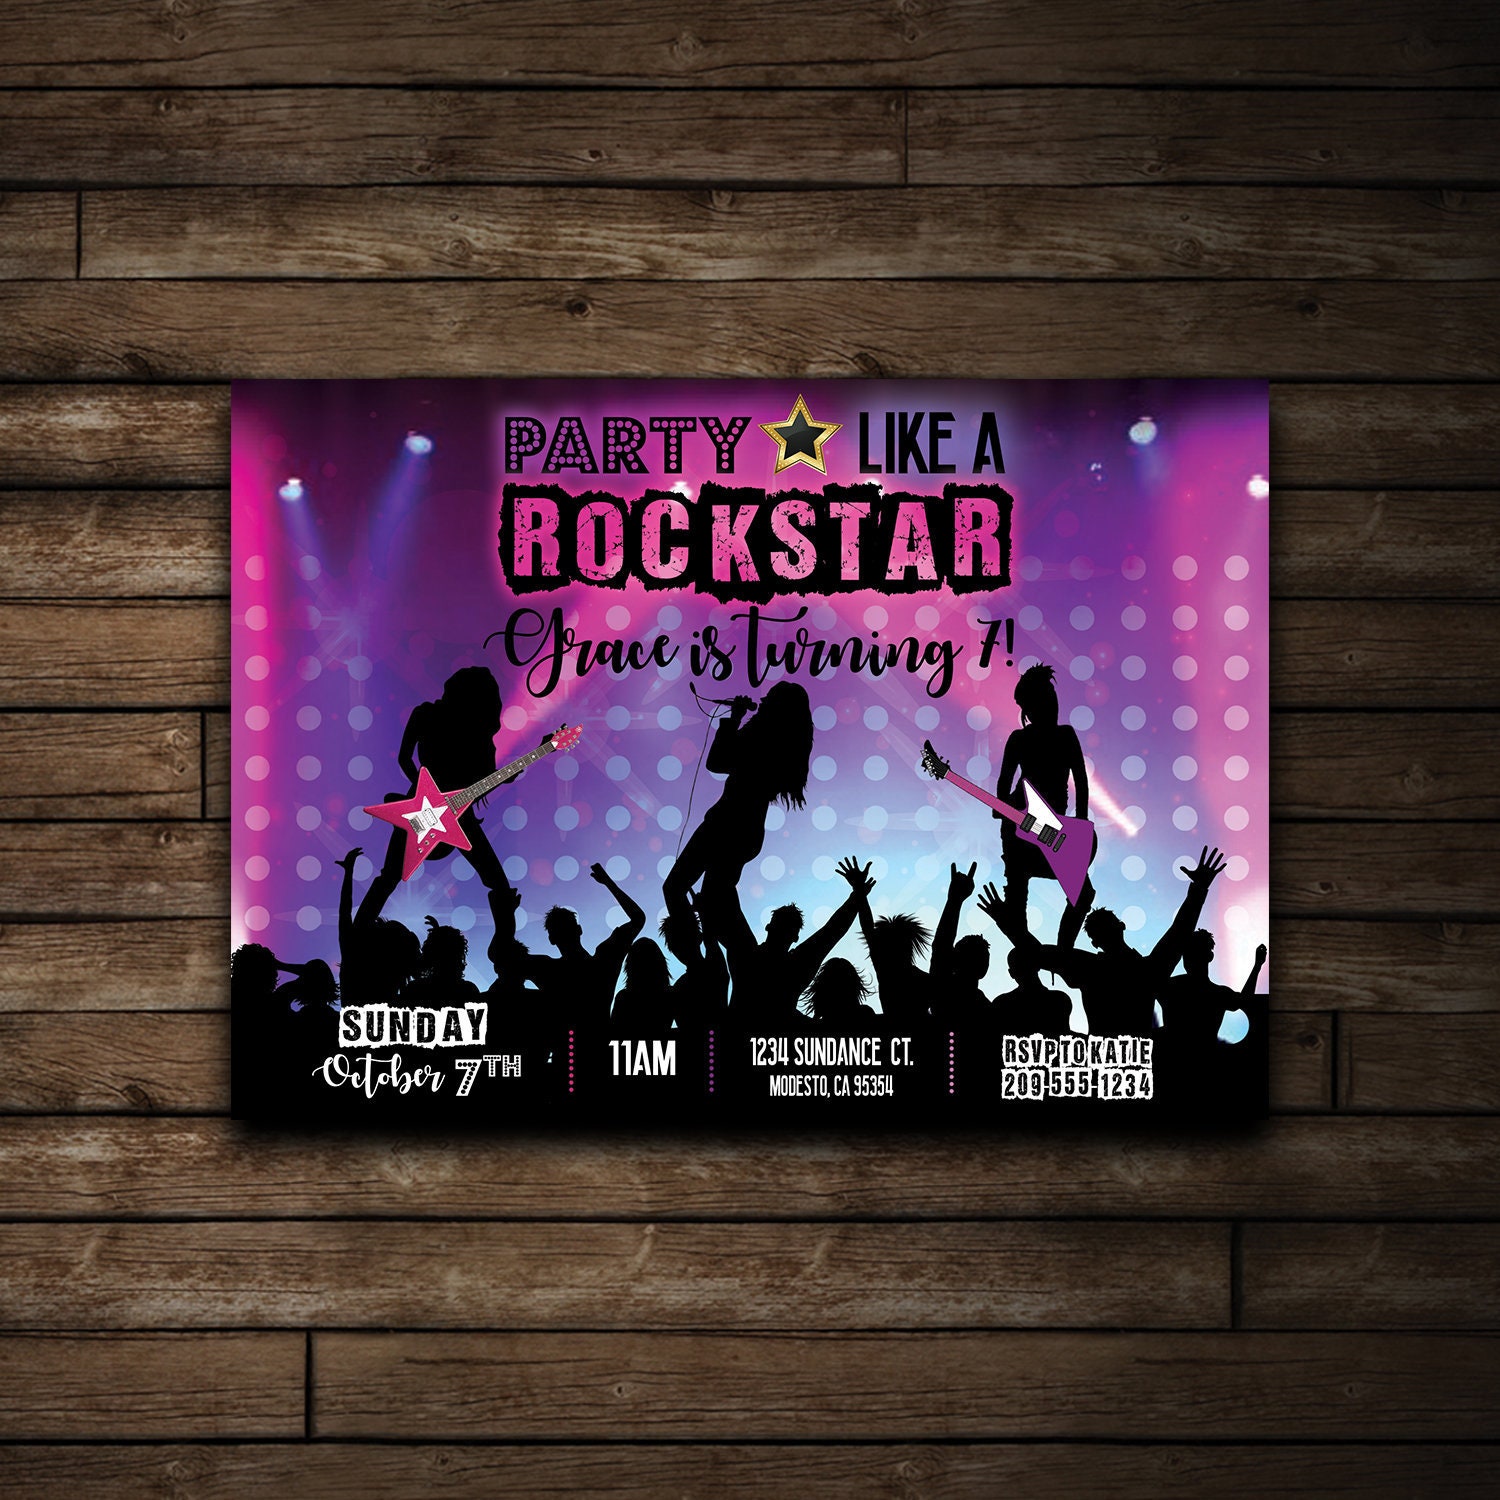 rockstar-birthday-party-invitation-printable-party-download-now-etsy